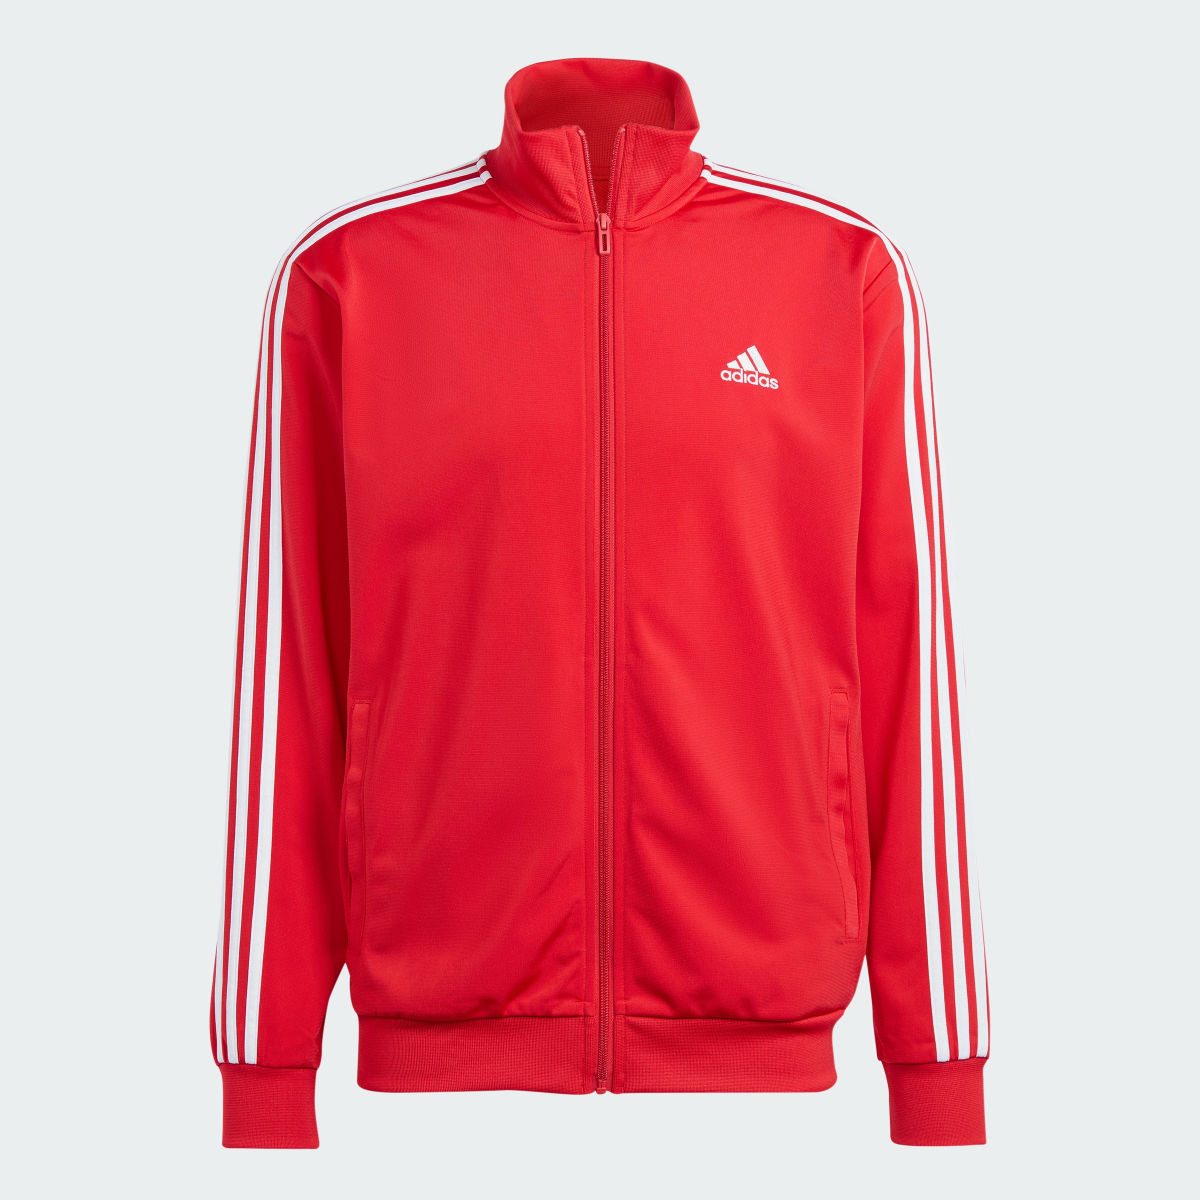 Adidas Basic 3-Stripes Tricot Track Suit. 6